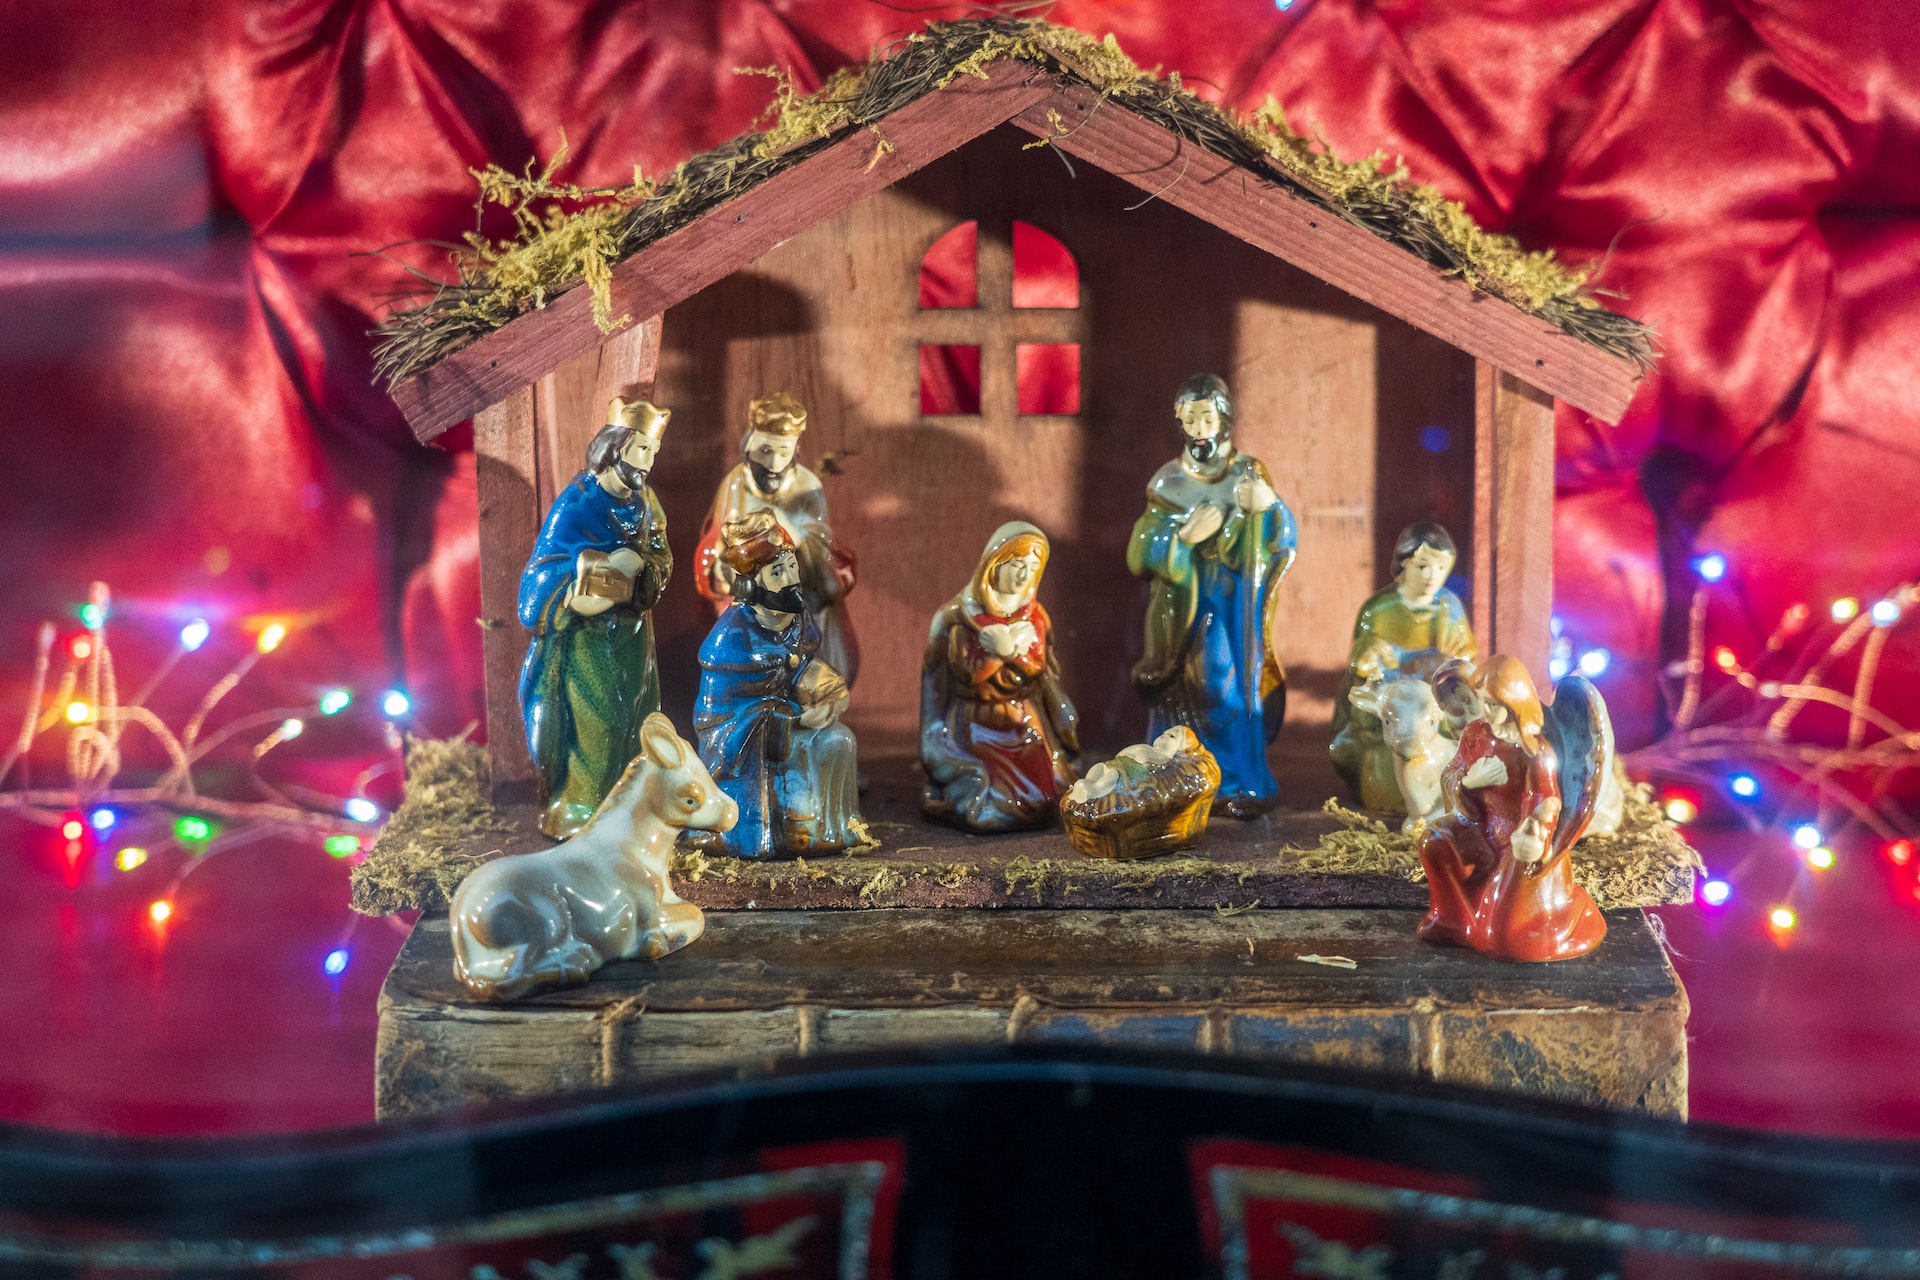 Wooden nativity creche or stable with colorful porcelin religious figurines celebrating The Ephiphany - The Spiritual Way to arrive at your destination.